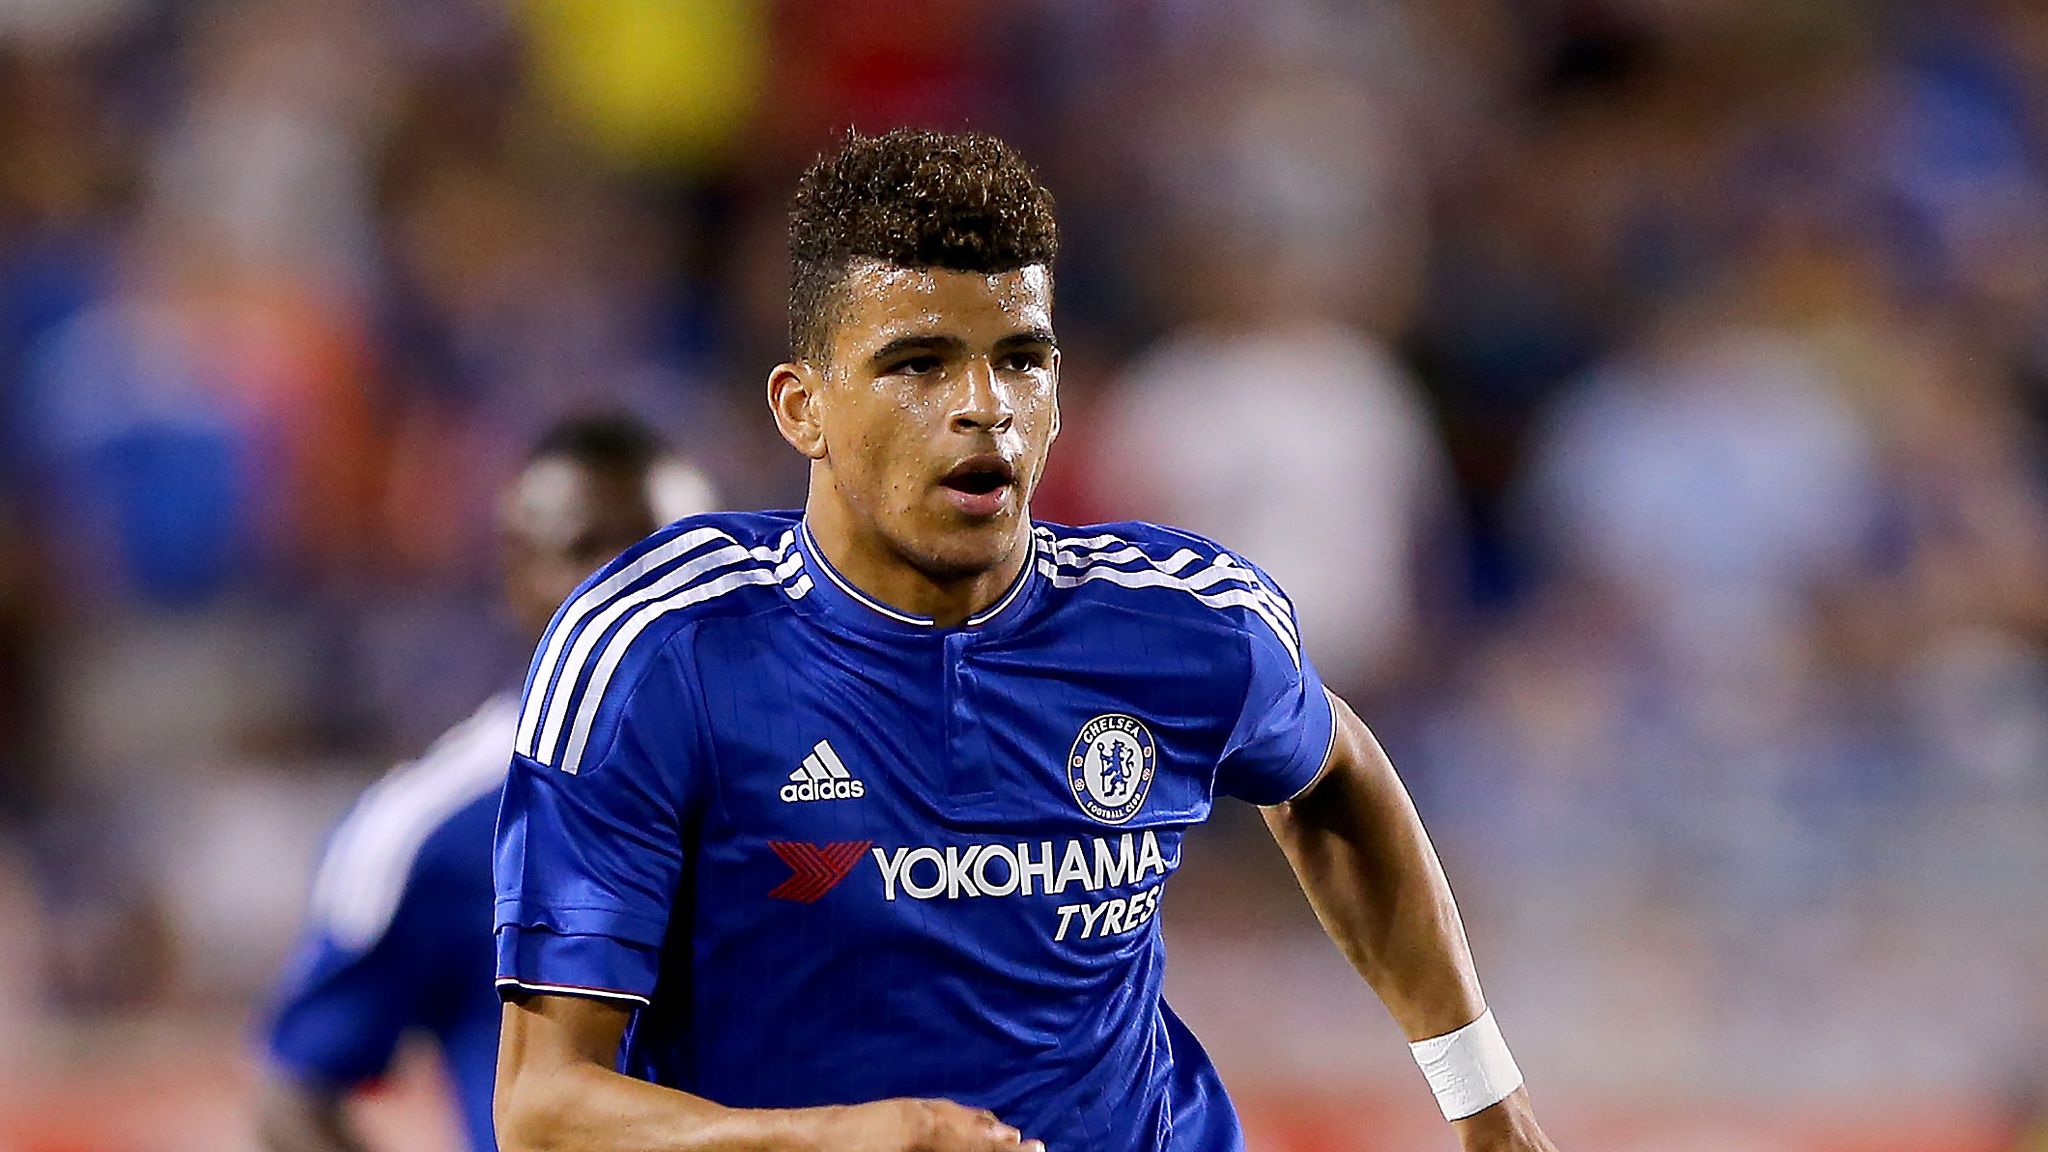  Dominic Solanke celebrates by clenching his fists and gritting his teeth after scoring a goal for Chelsea against D.C. United during a pre-season friendly in the International Champions Cup.